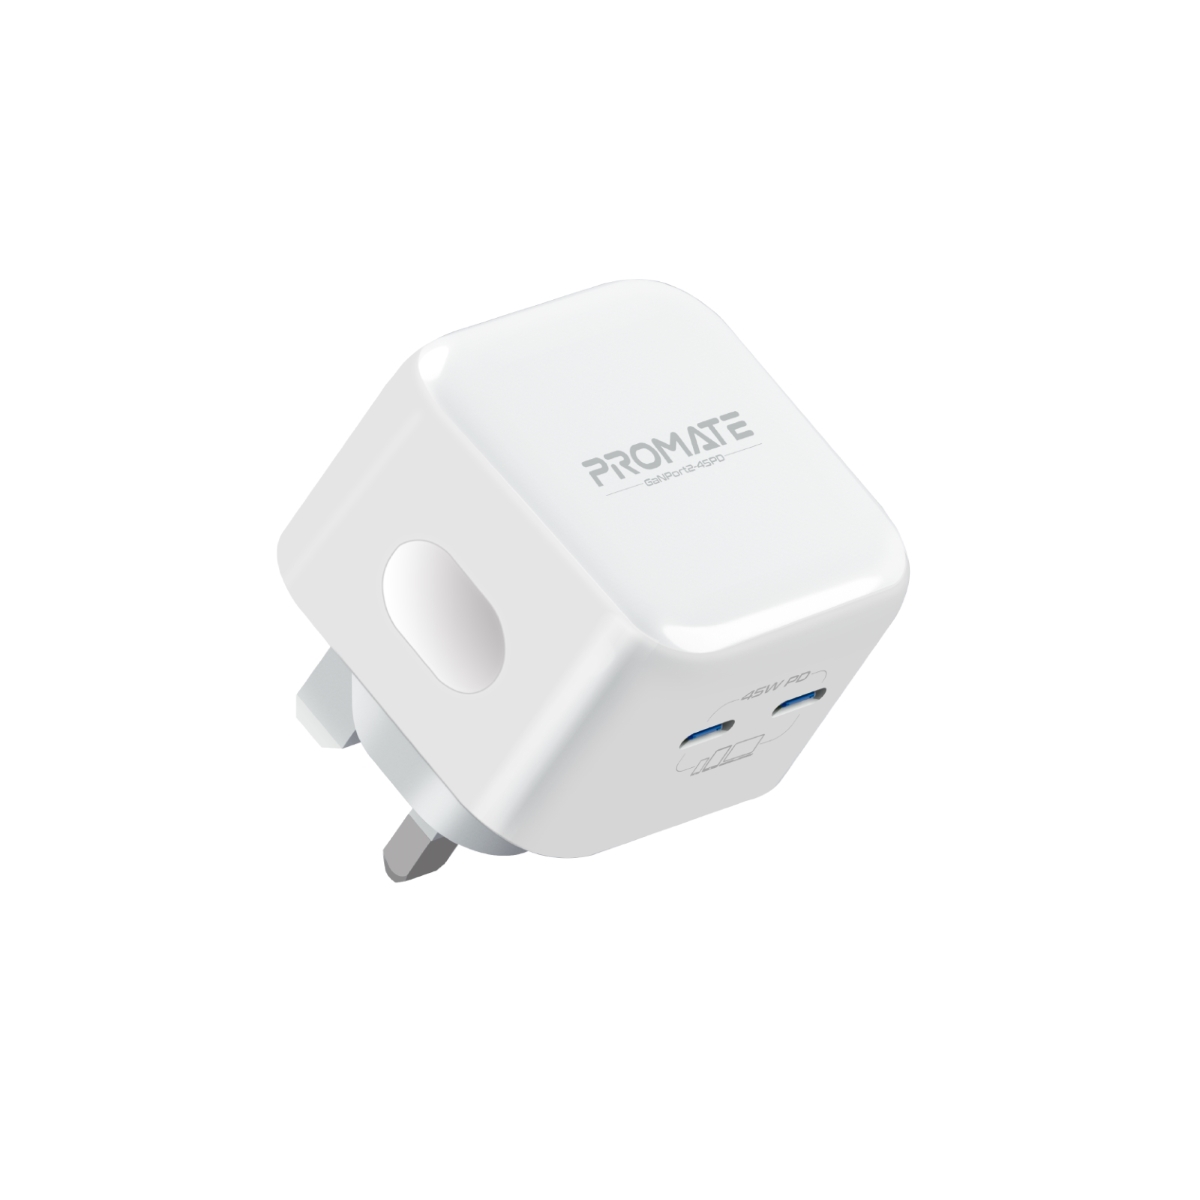 Promate GaN USB-C Charger with 45W Dual USB-C Power Delivery Ports and Short-Circuit Protection, GaNPort2-45PD